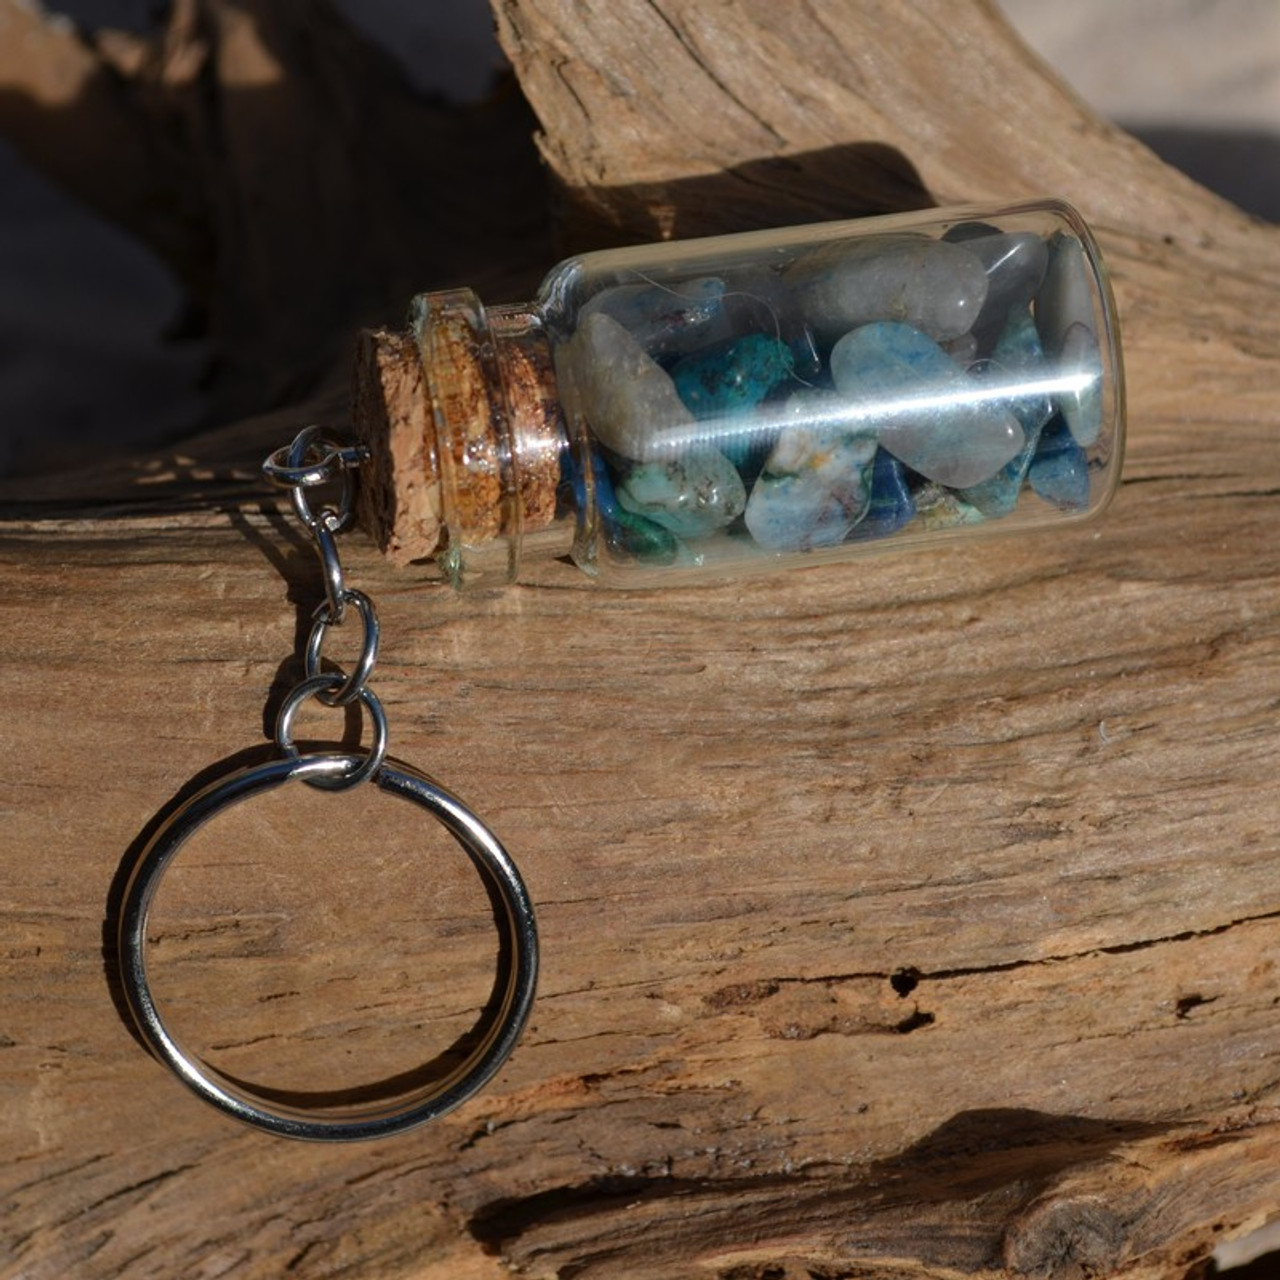 Chrysocolla Stones in a Glass Vial Keychain - Made to Order